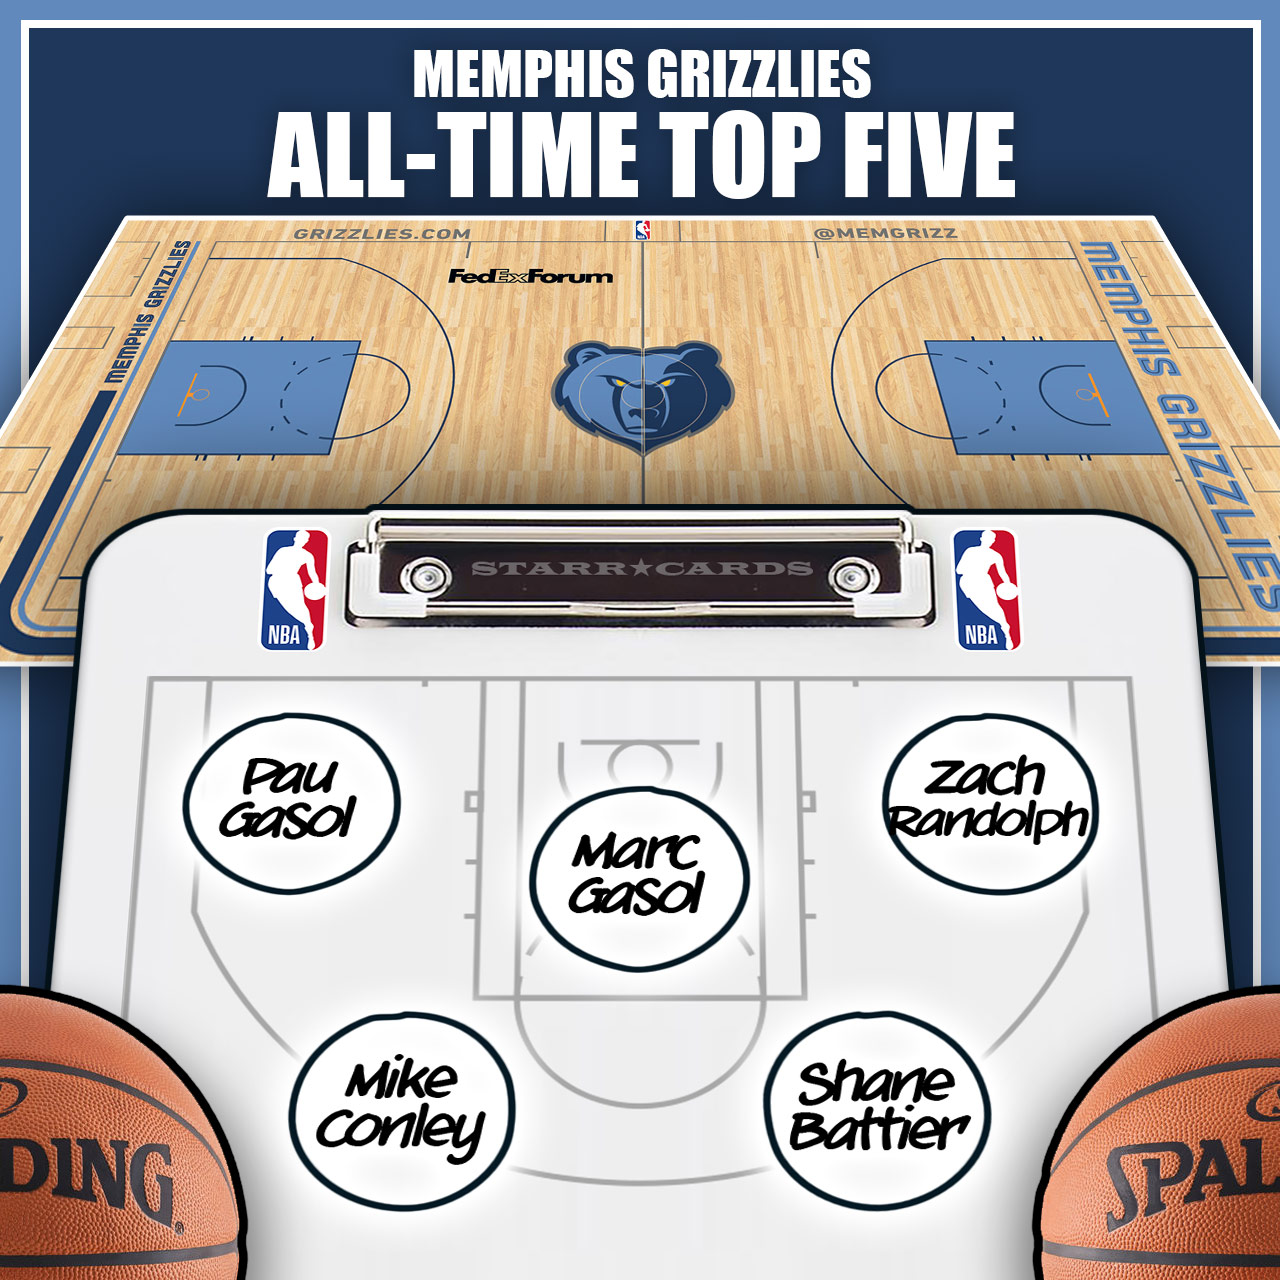 Marc Gasol became the Grizzlies' all-time rebounds leader - Eurohoops